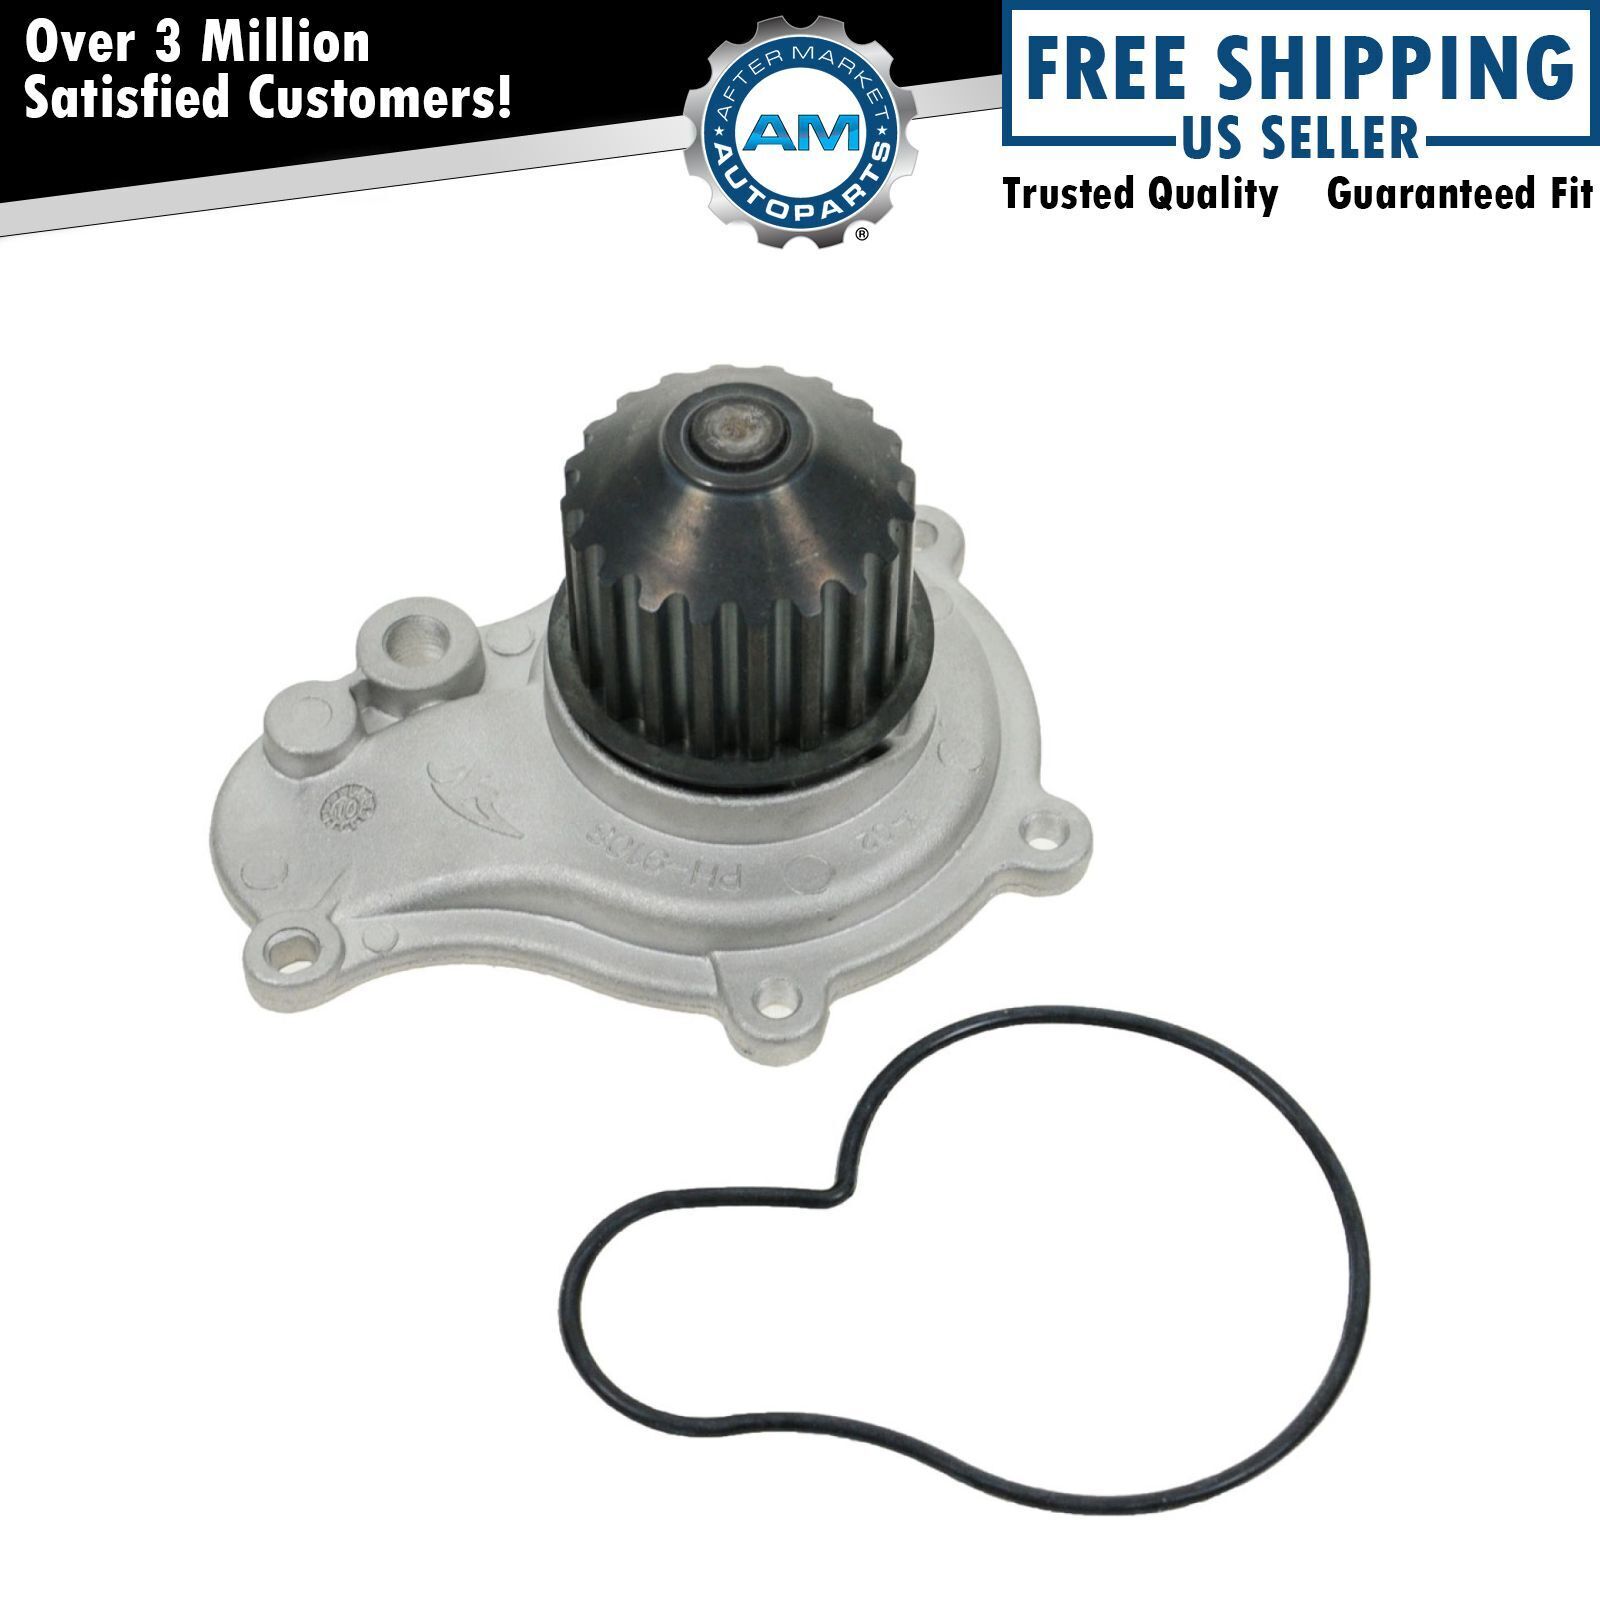 Water Pump for Dodge Stratus Jeep Chrysler Plymouth Car Van SUV 2.4L